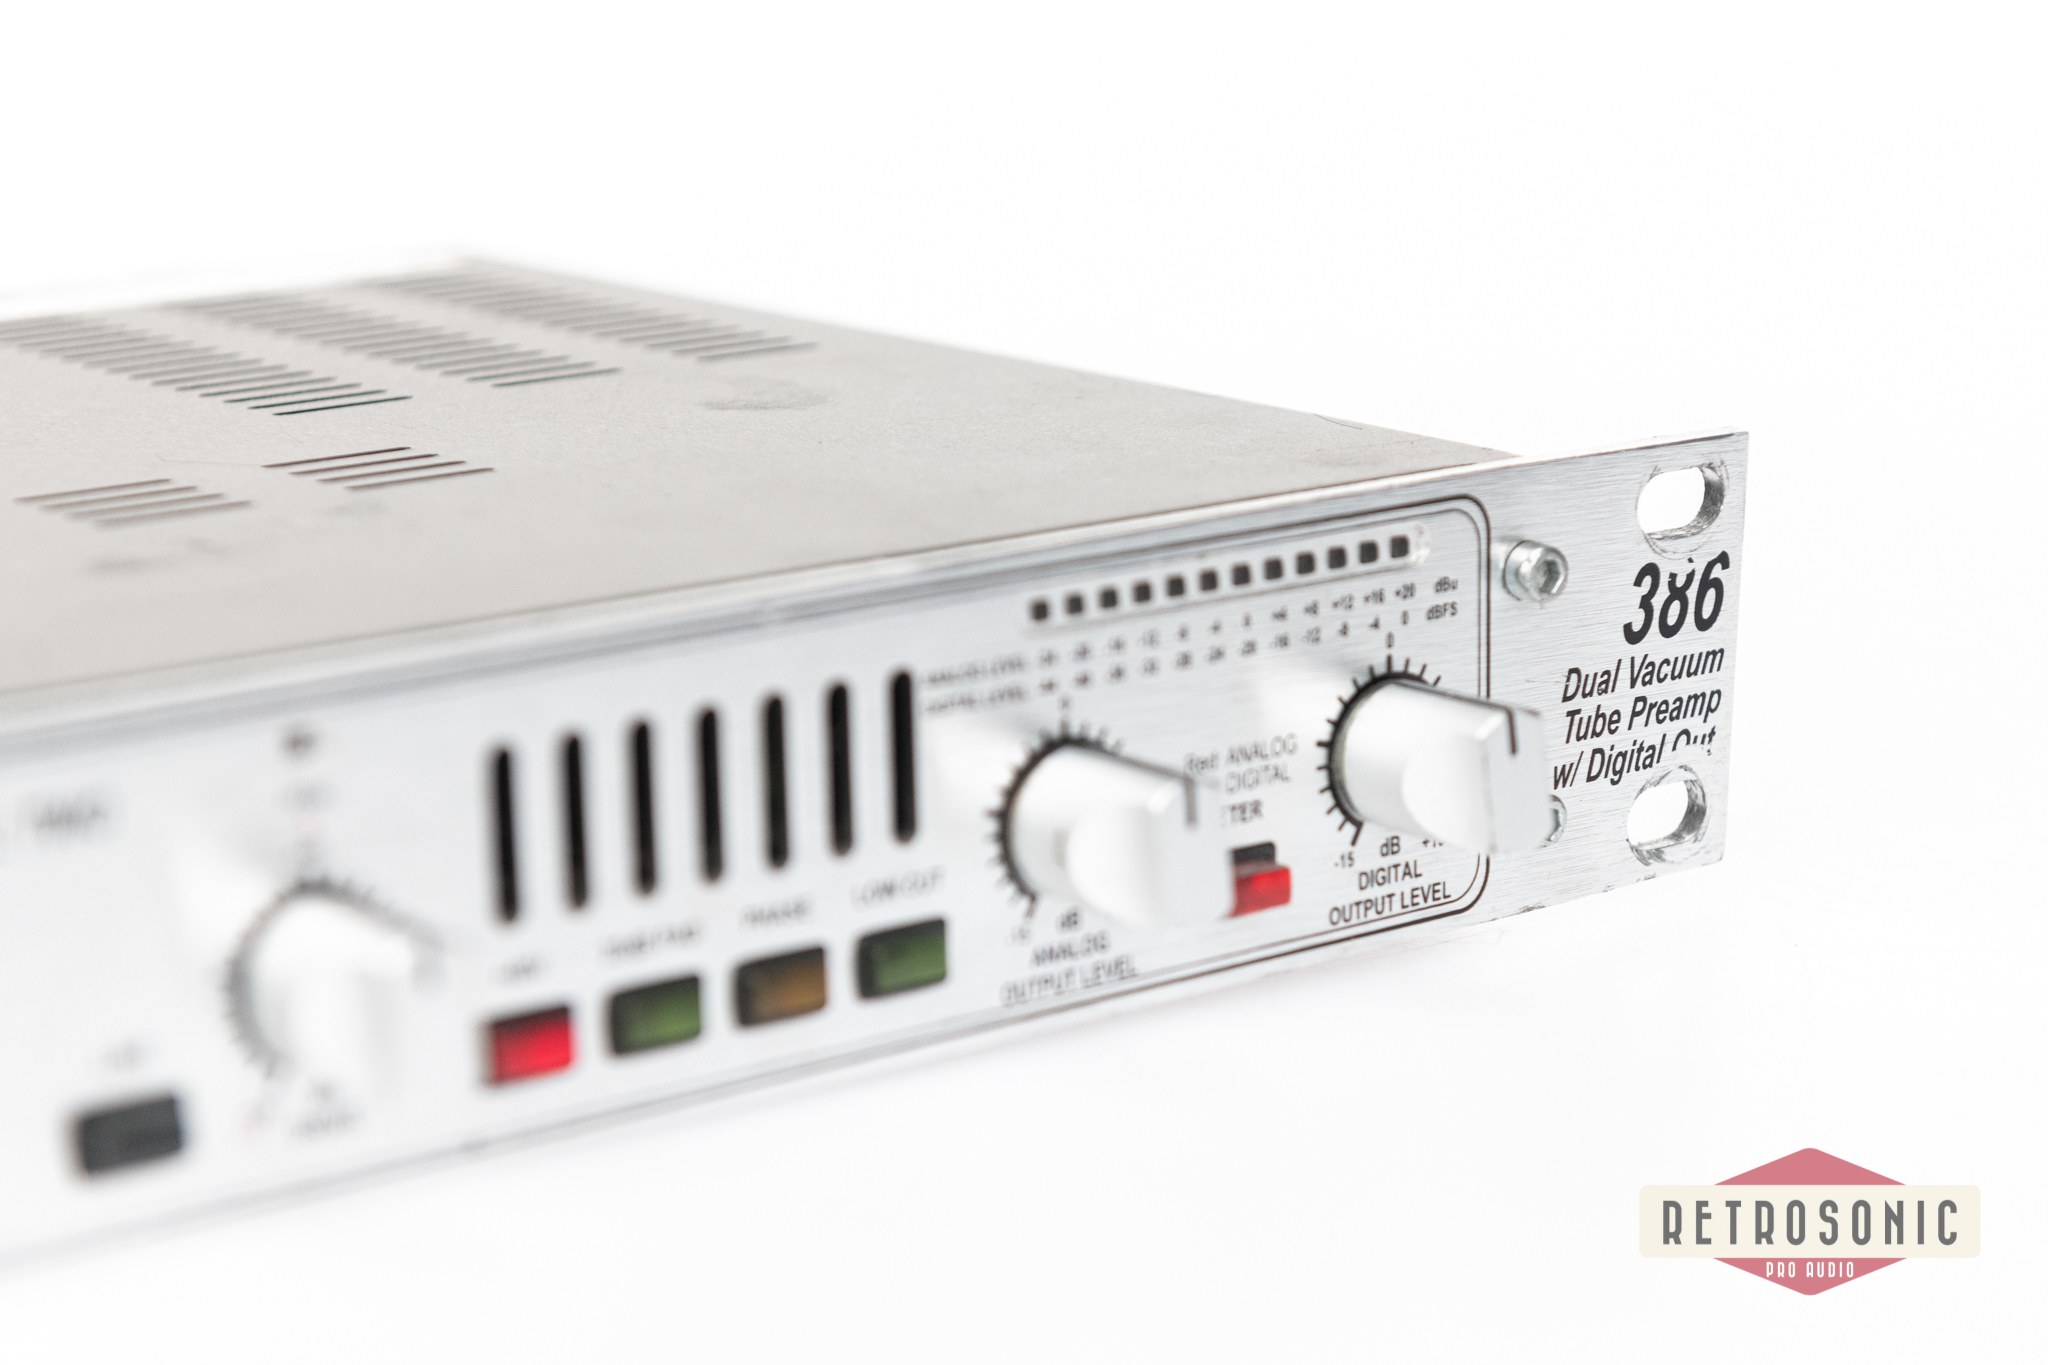 DBX 386 Dual Tube Preamp with Digital Out